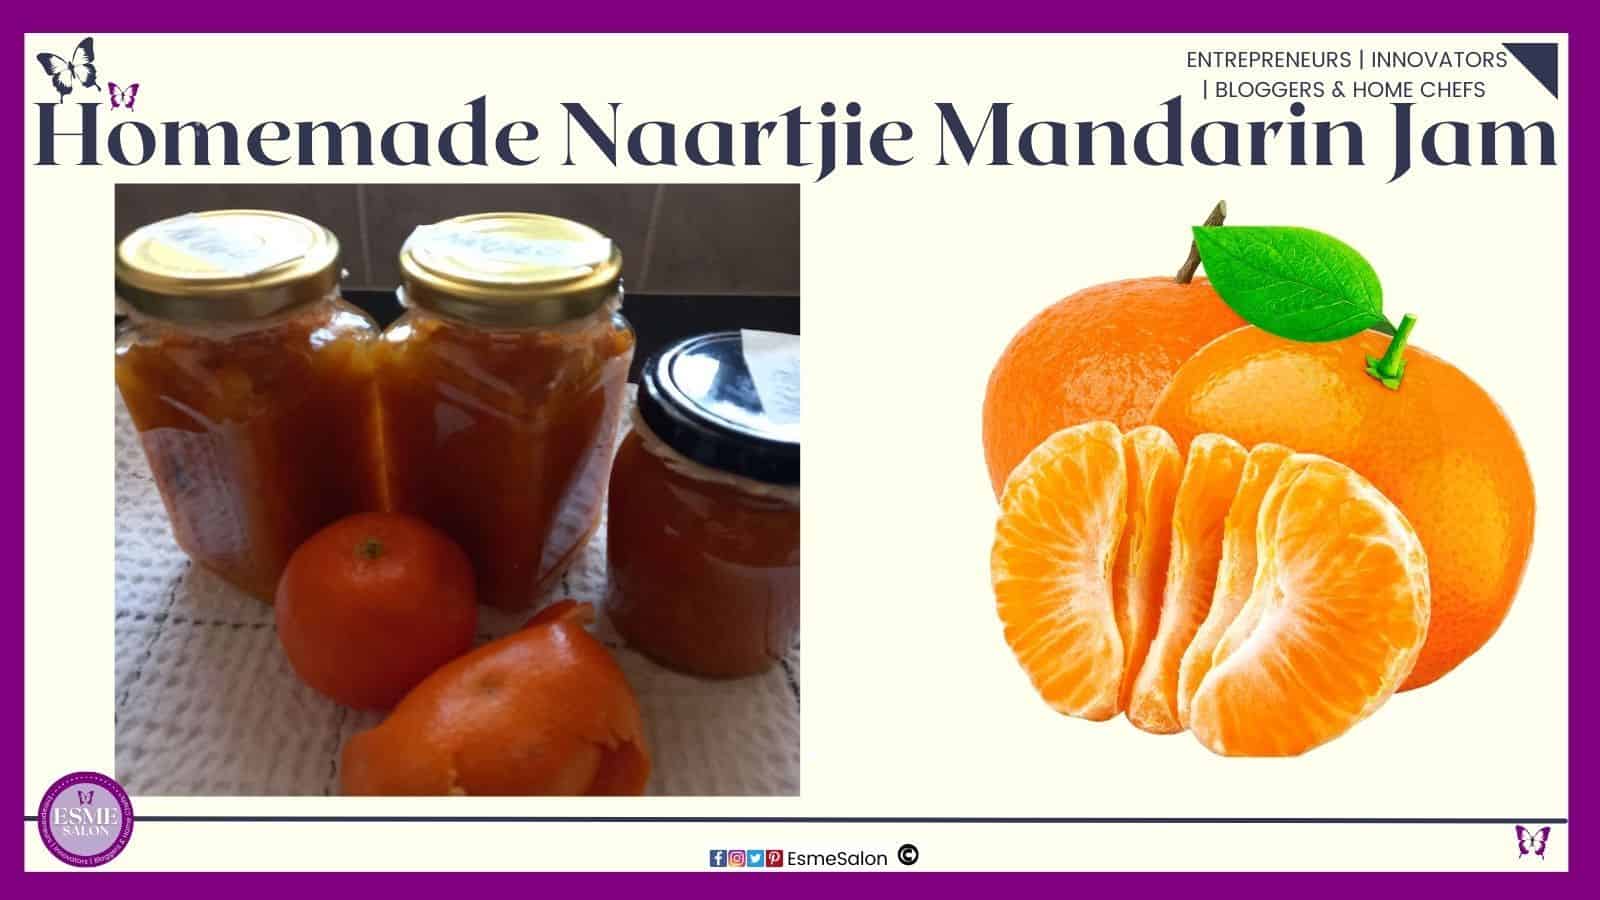 an image of three glass jars with lids filled with Homemade Naartjie Mandarin Jam as well as a madarin and some mandarin peels in front of the bottles